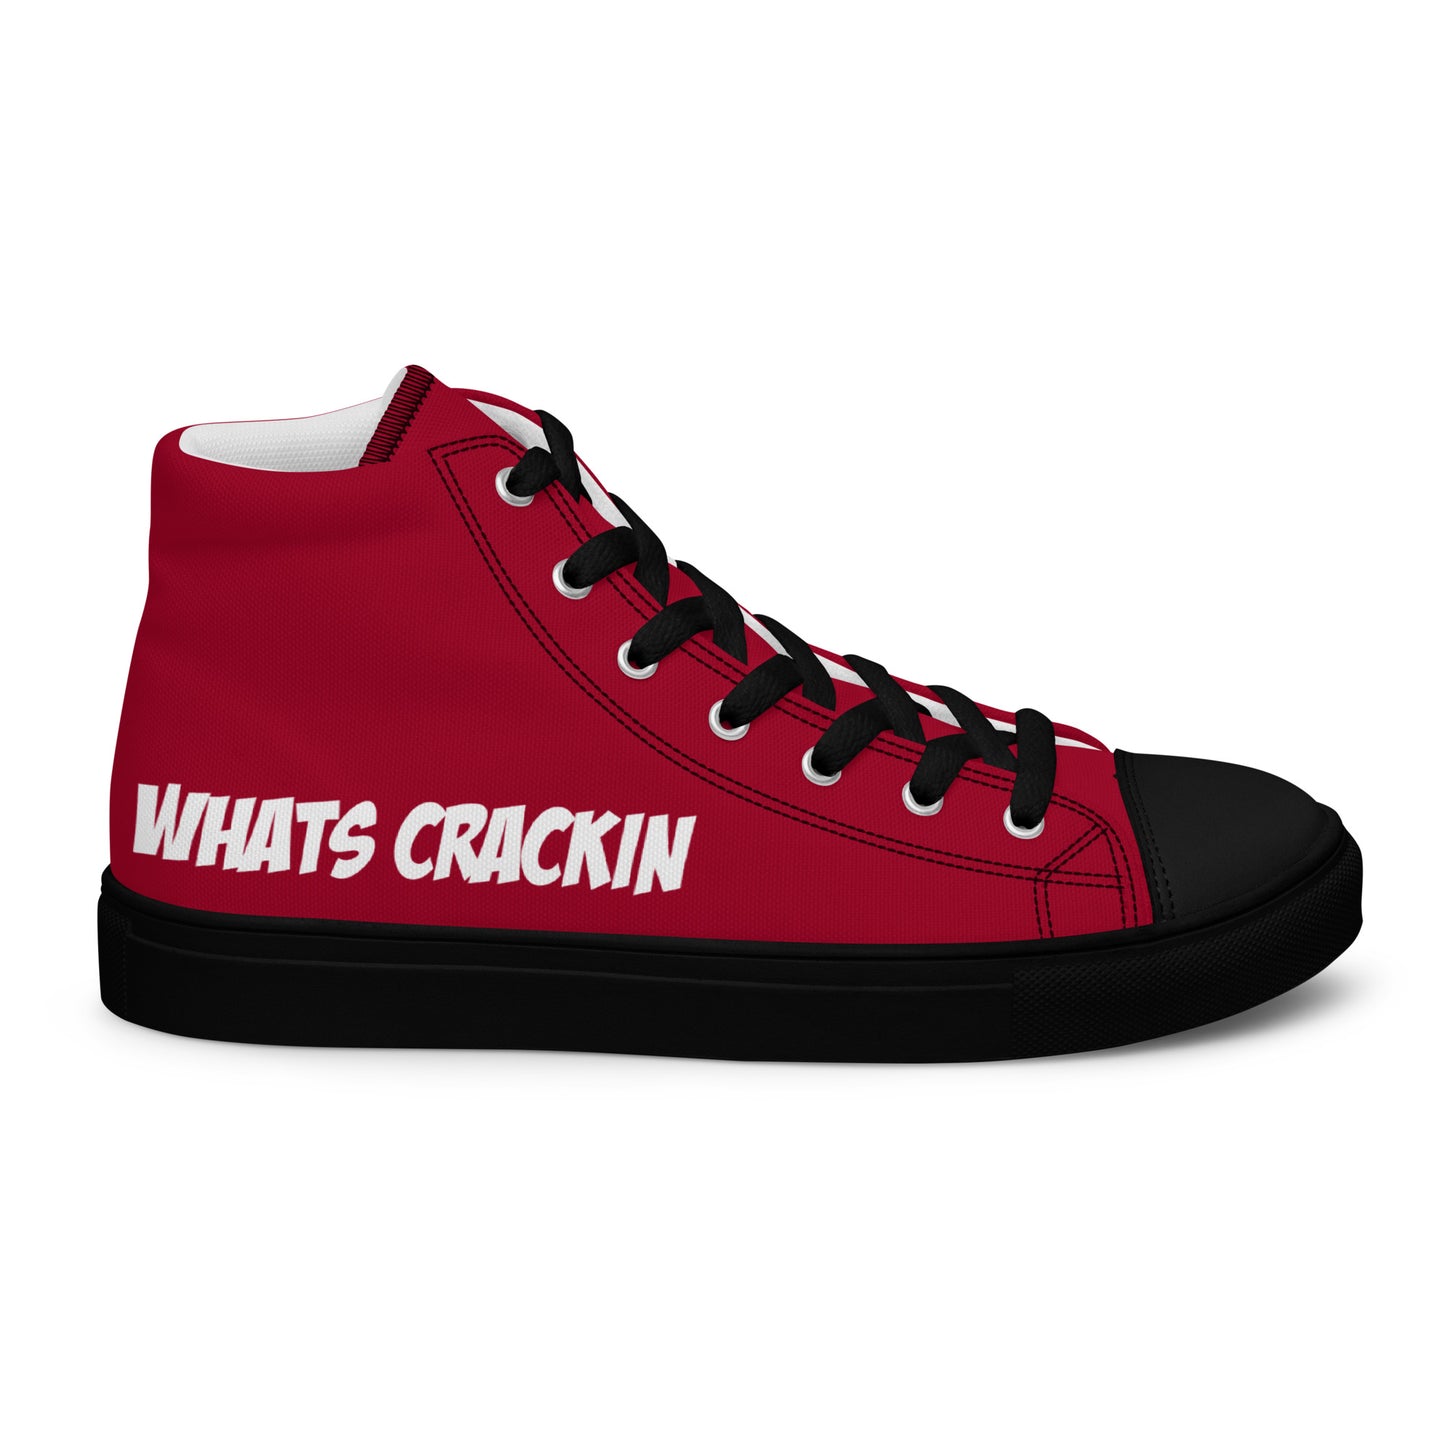 WC high top canvas shoes